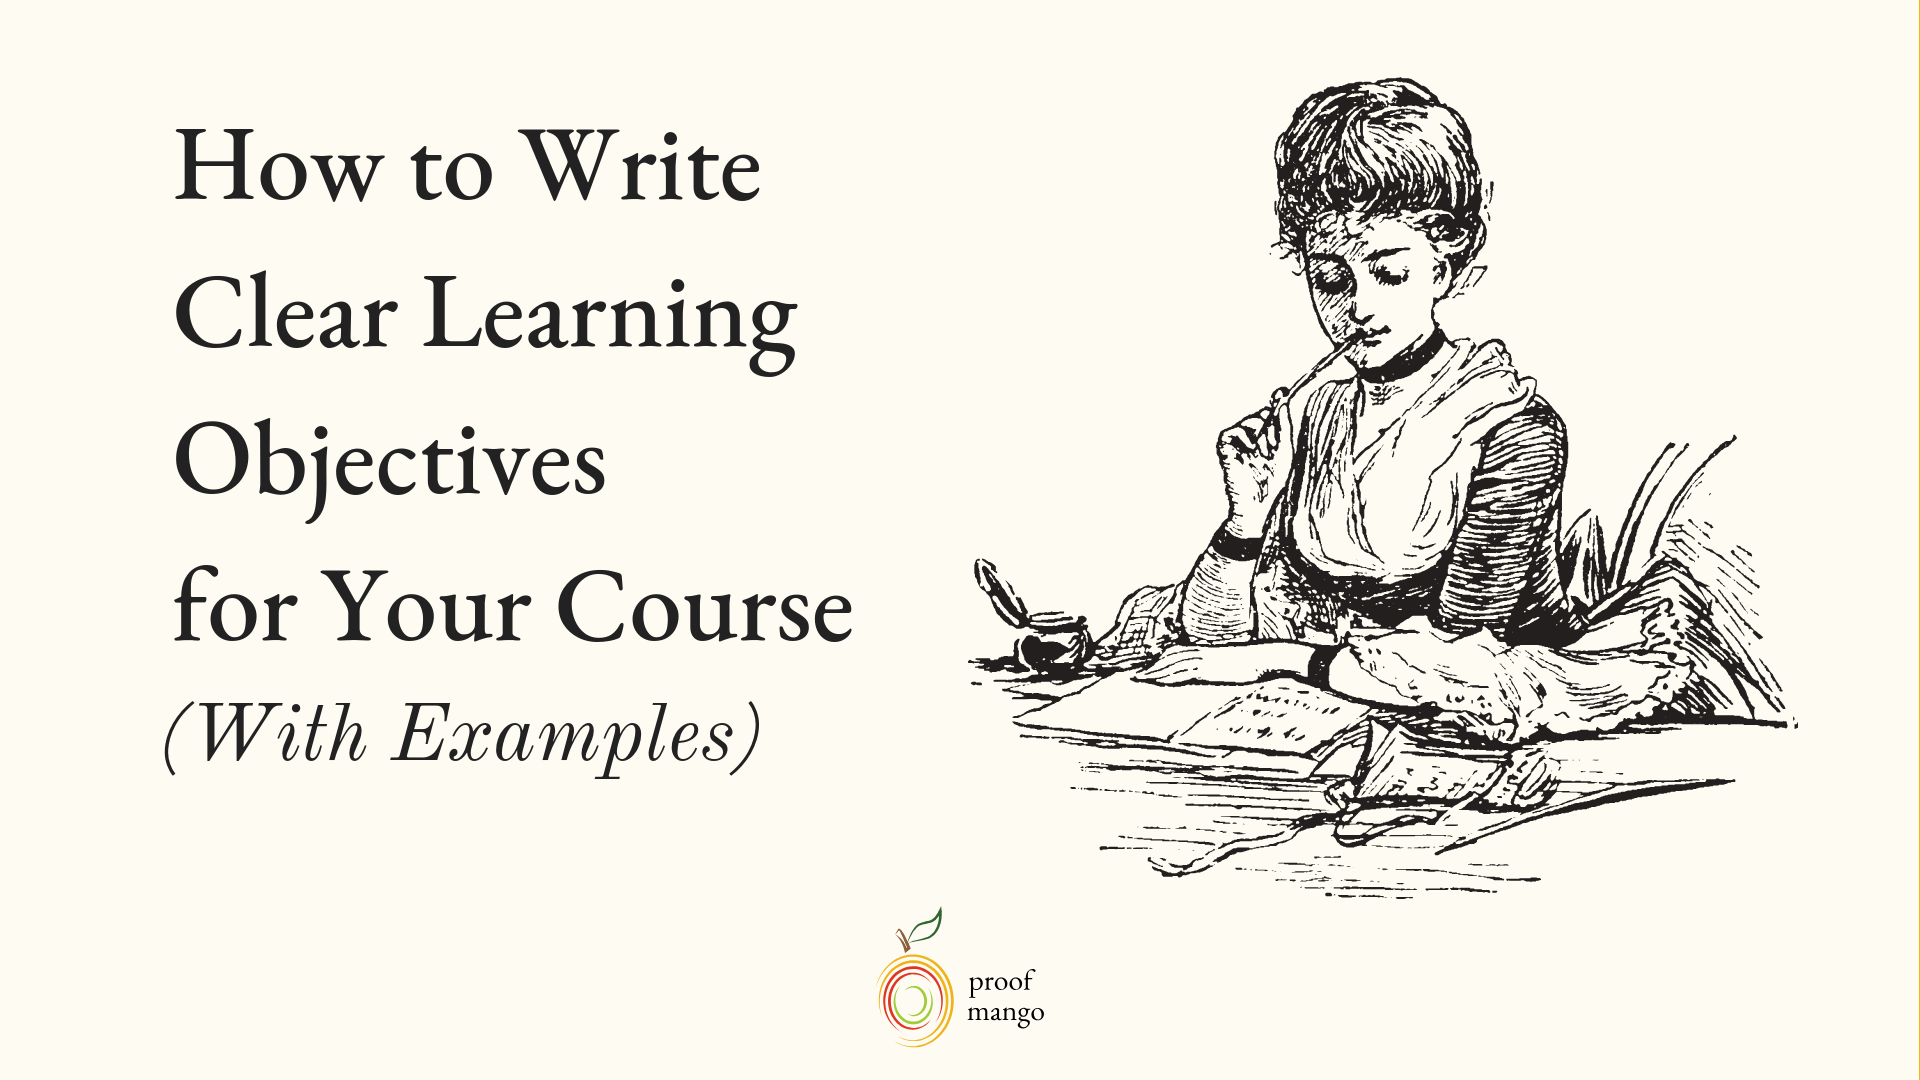 How-to-Write-Clear-Learning-Objectives-for-Your-Course-With-Examples